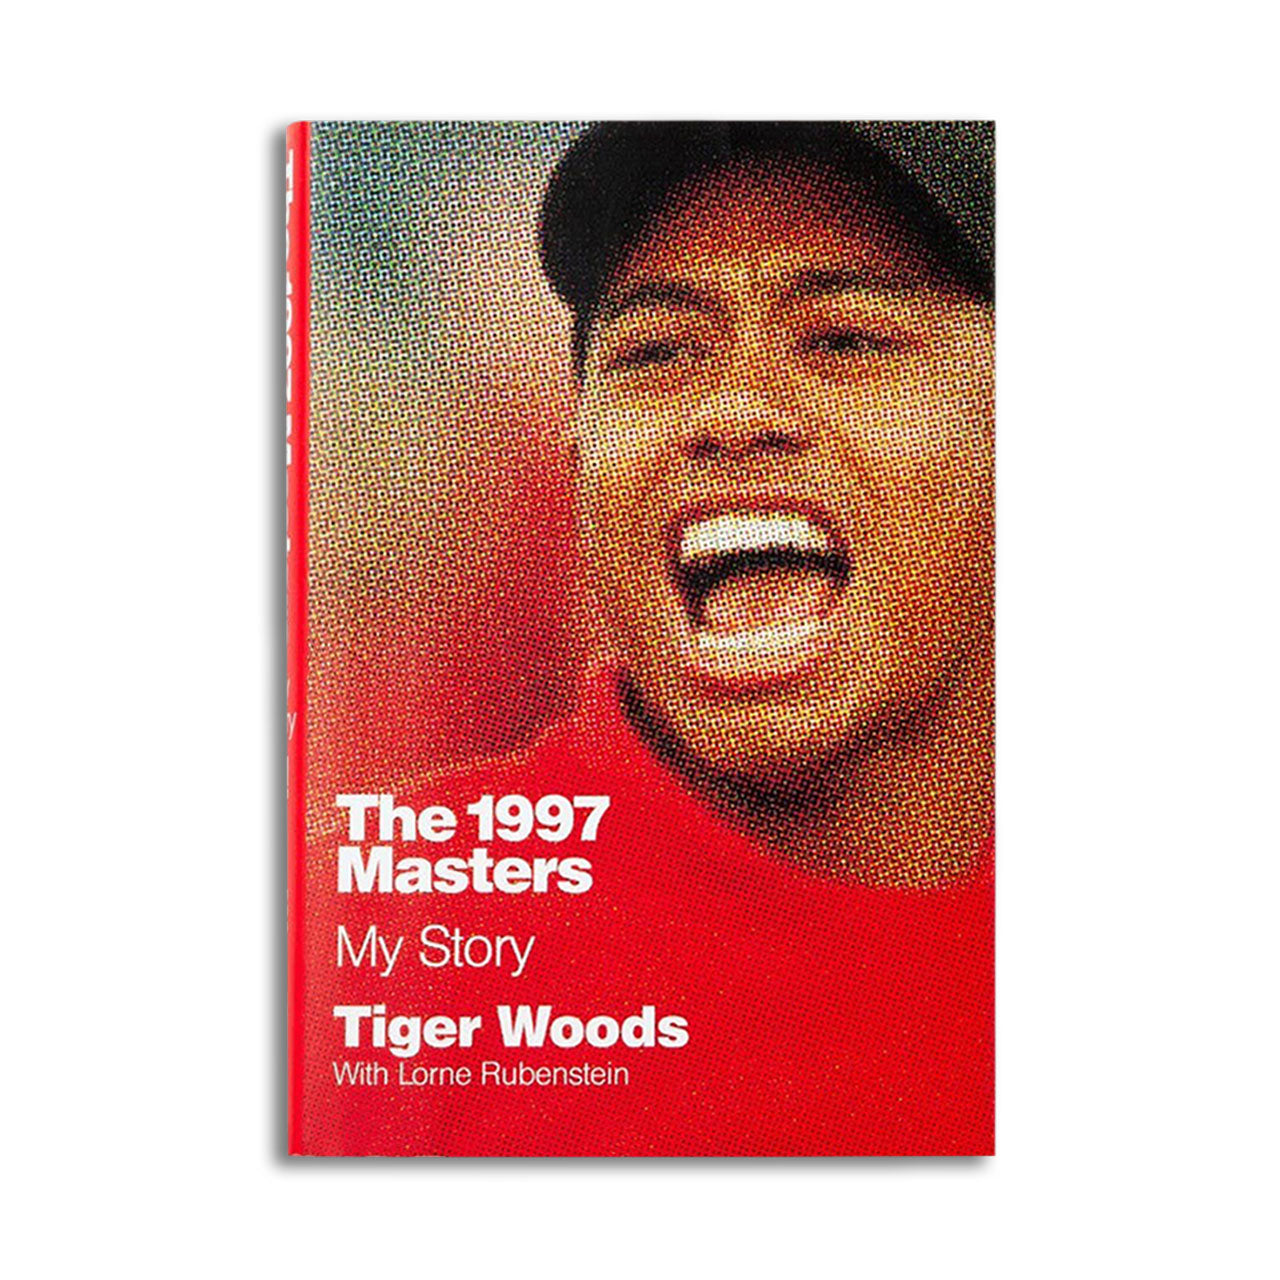 Tiger Woods 1997 Masters: My Story signiertes Buch